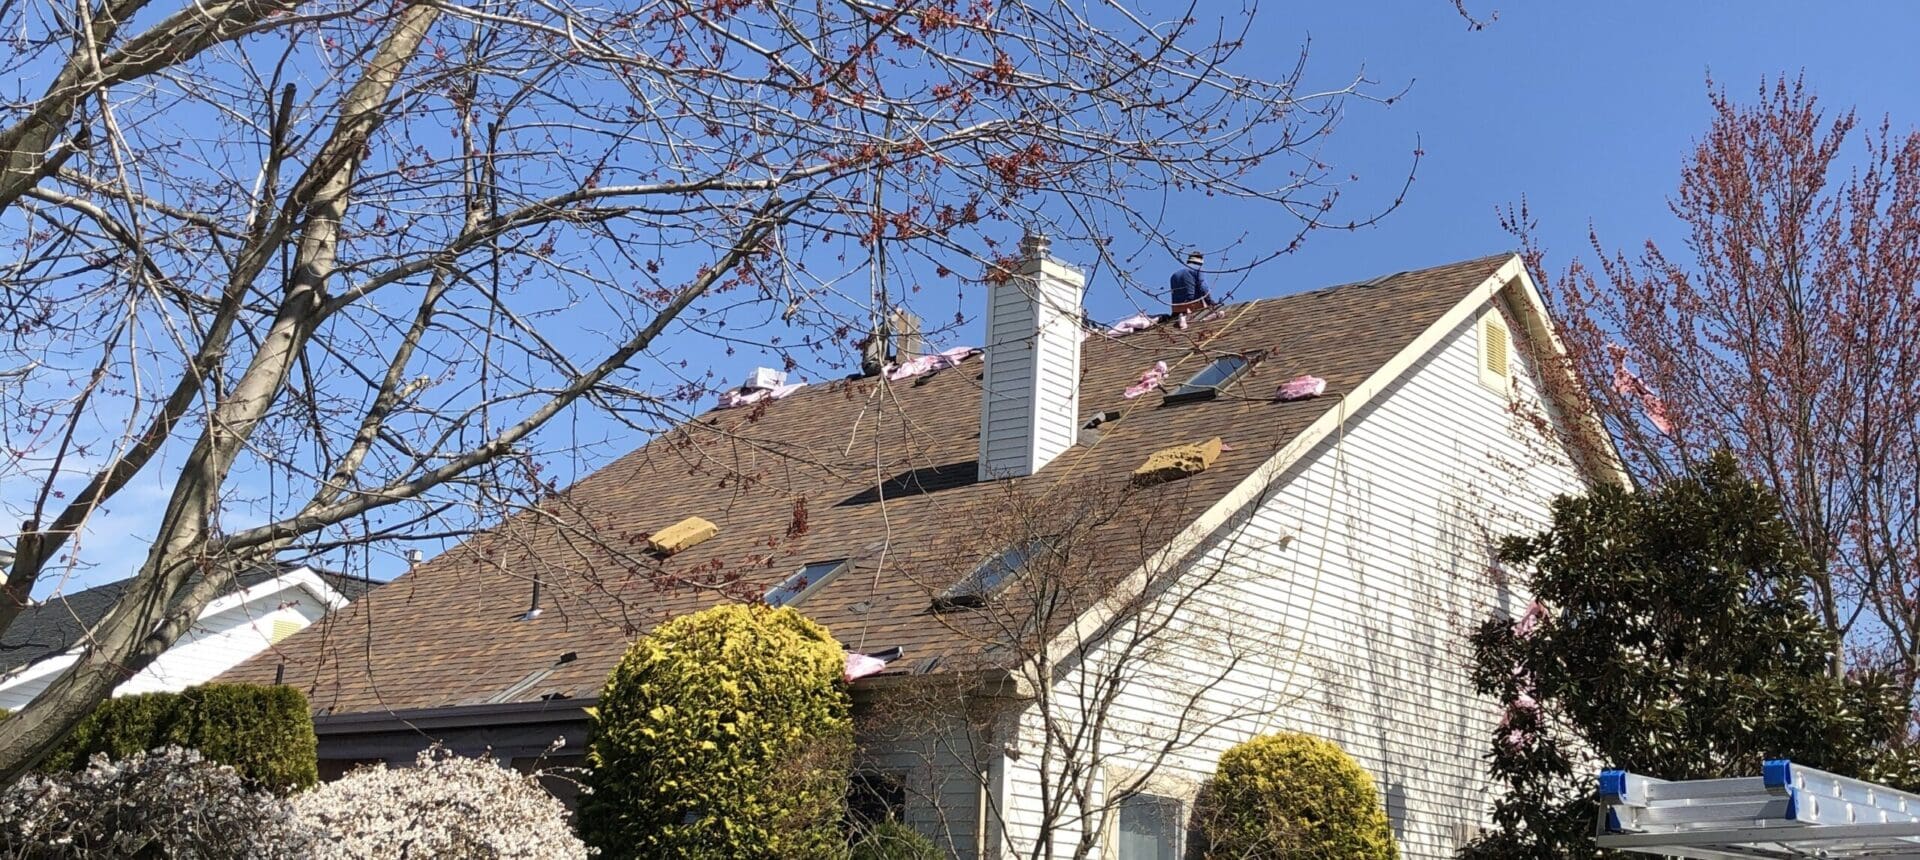 A house with a bunch of shingles on the roof